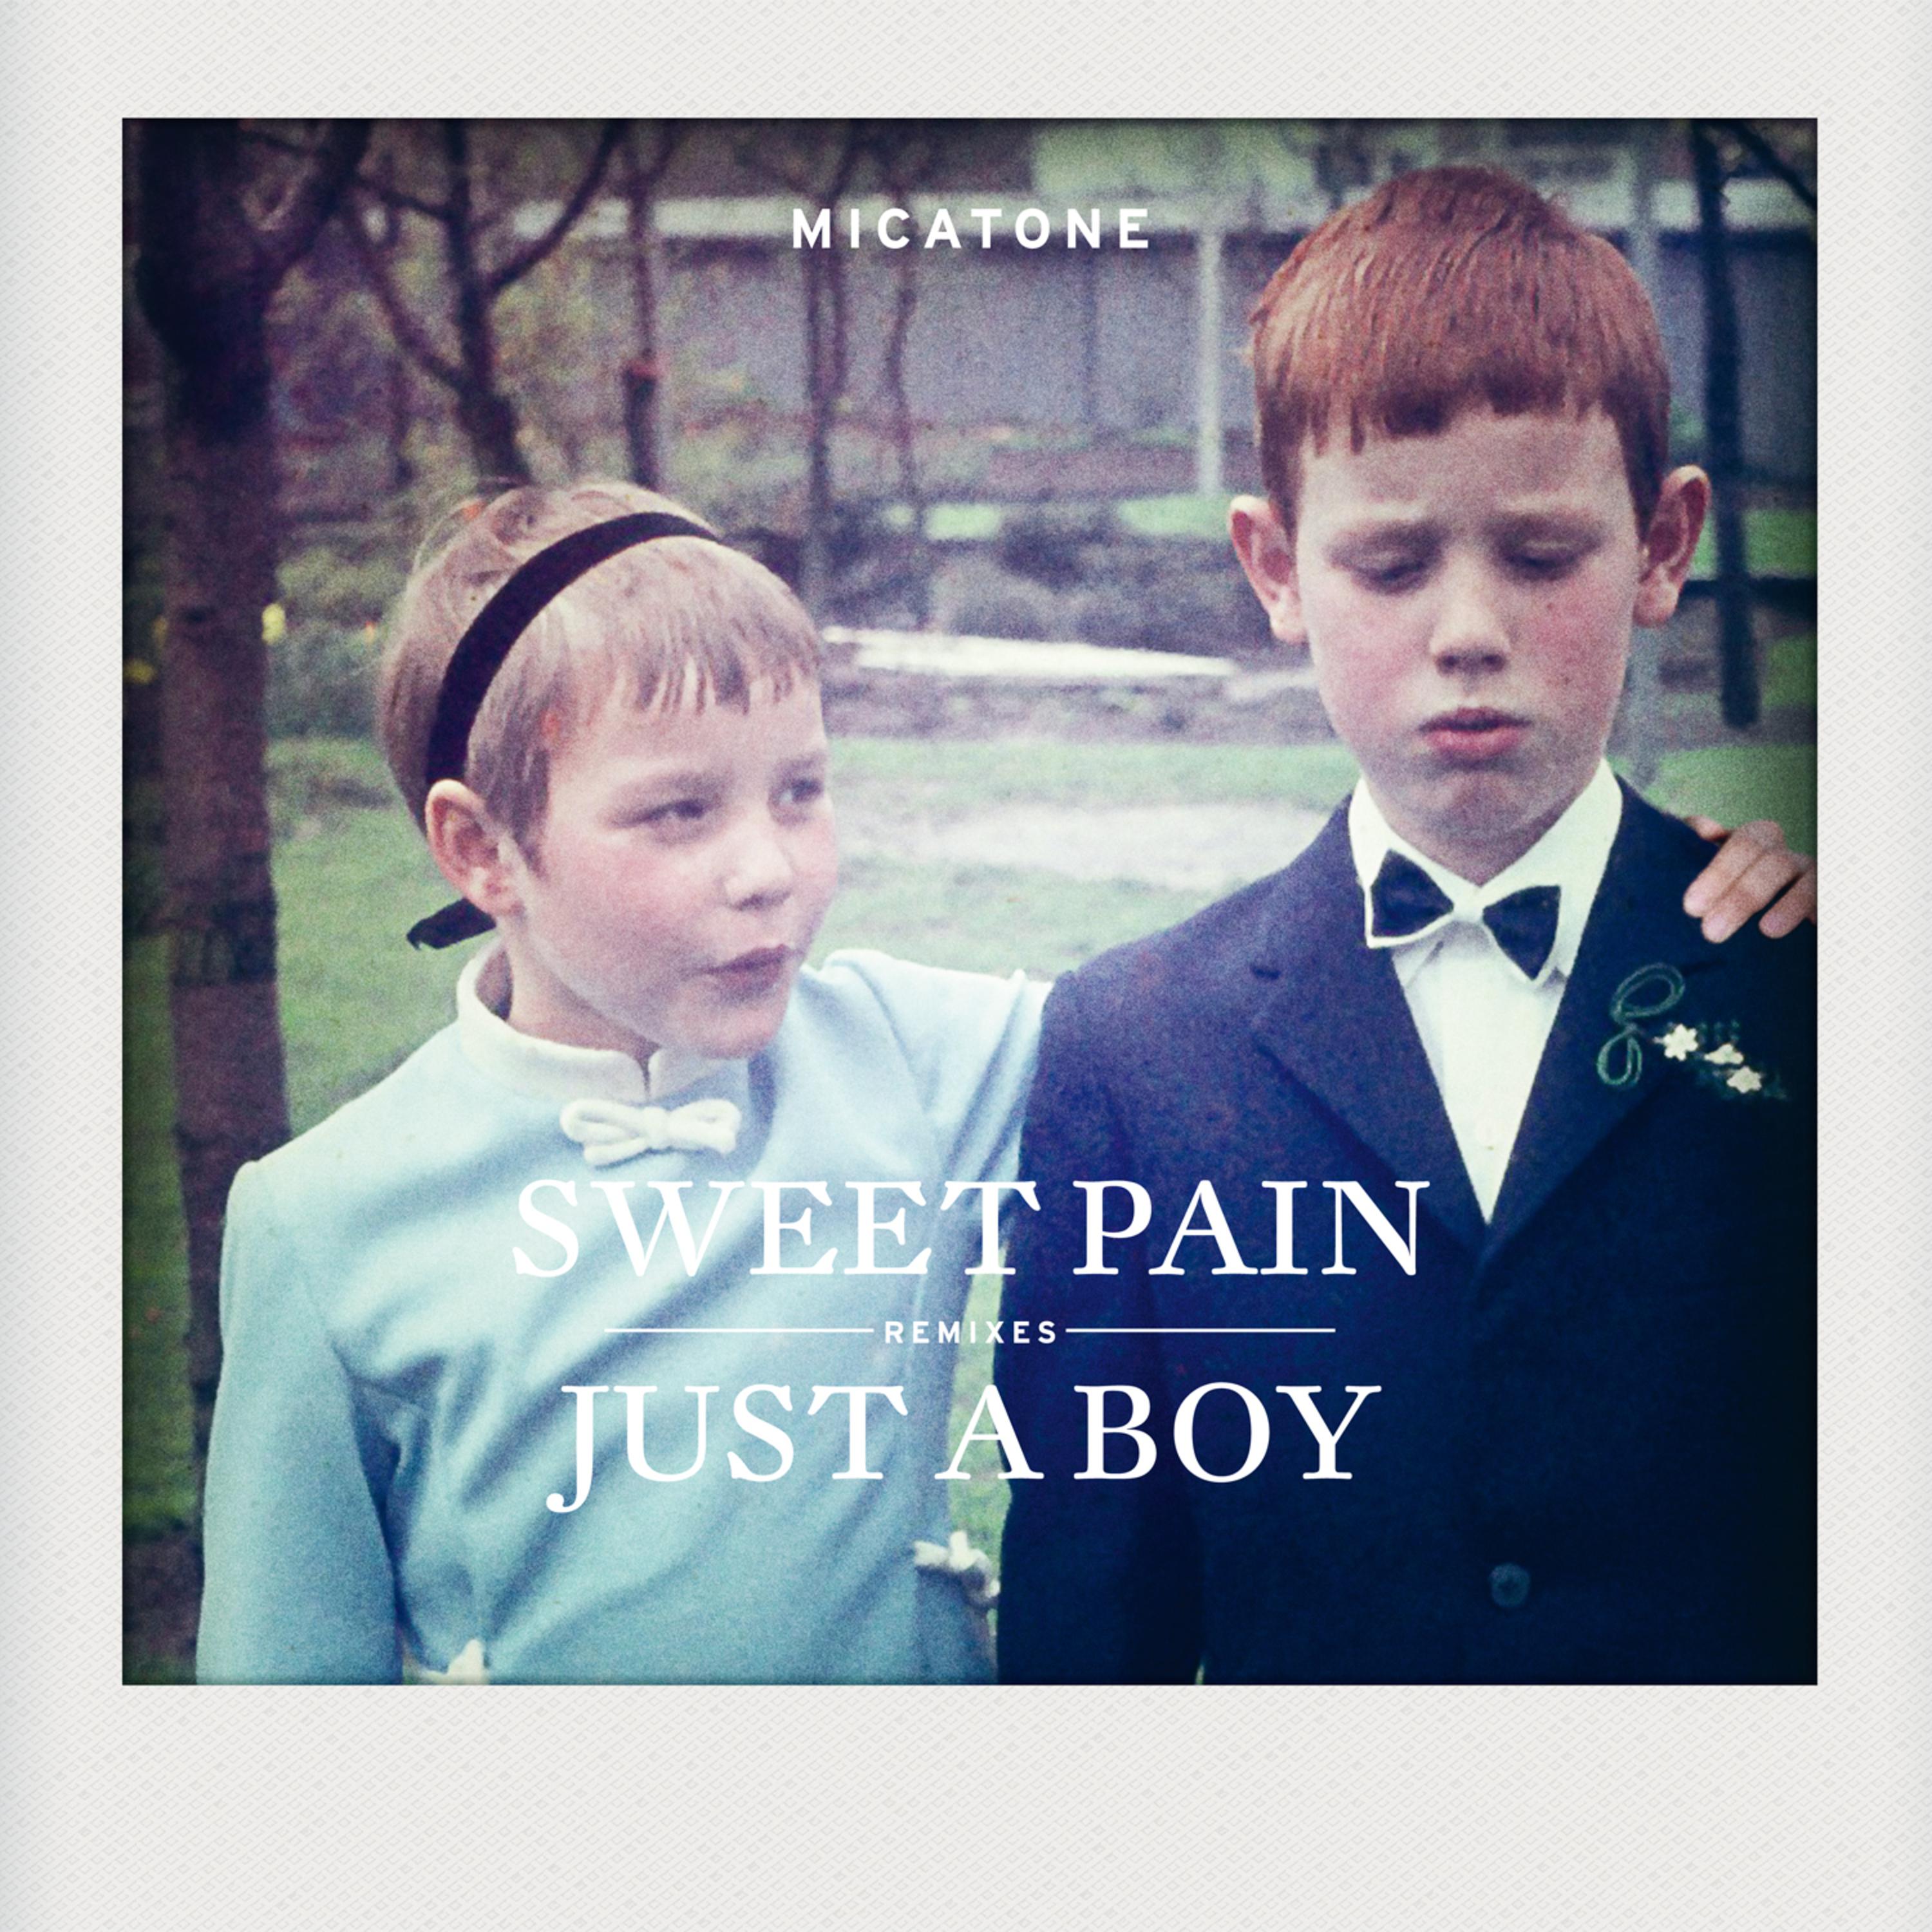 Sweet Pain (Stee Downes Remix)